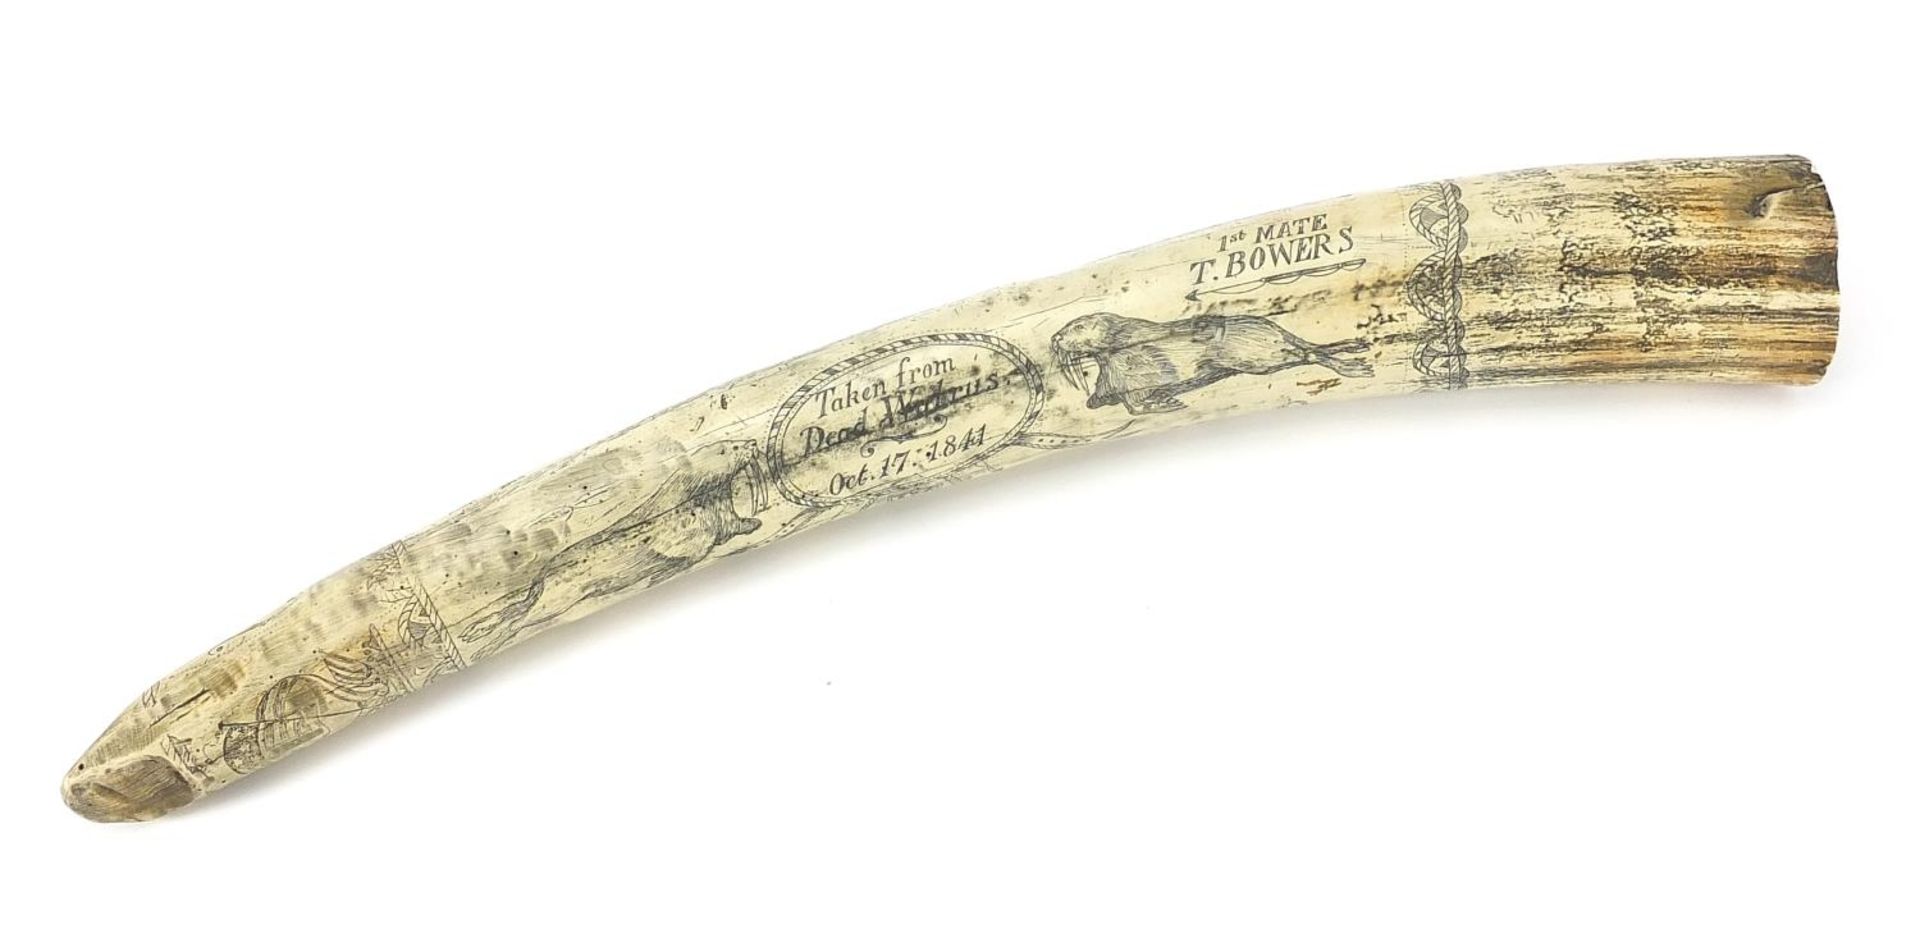 Large scrimshaw style model of a tusk, 53cm in length